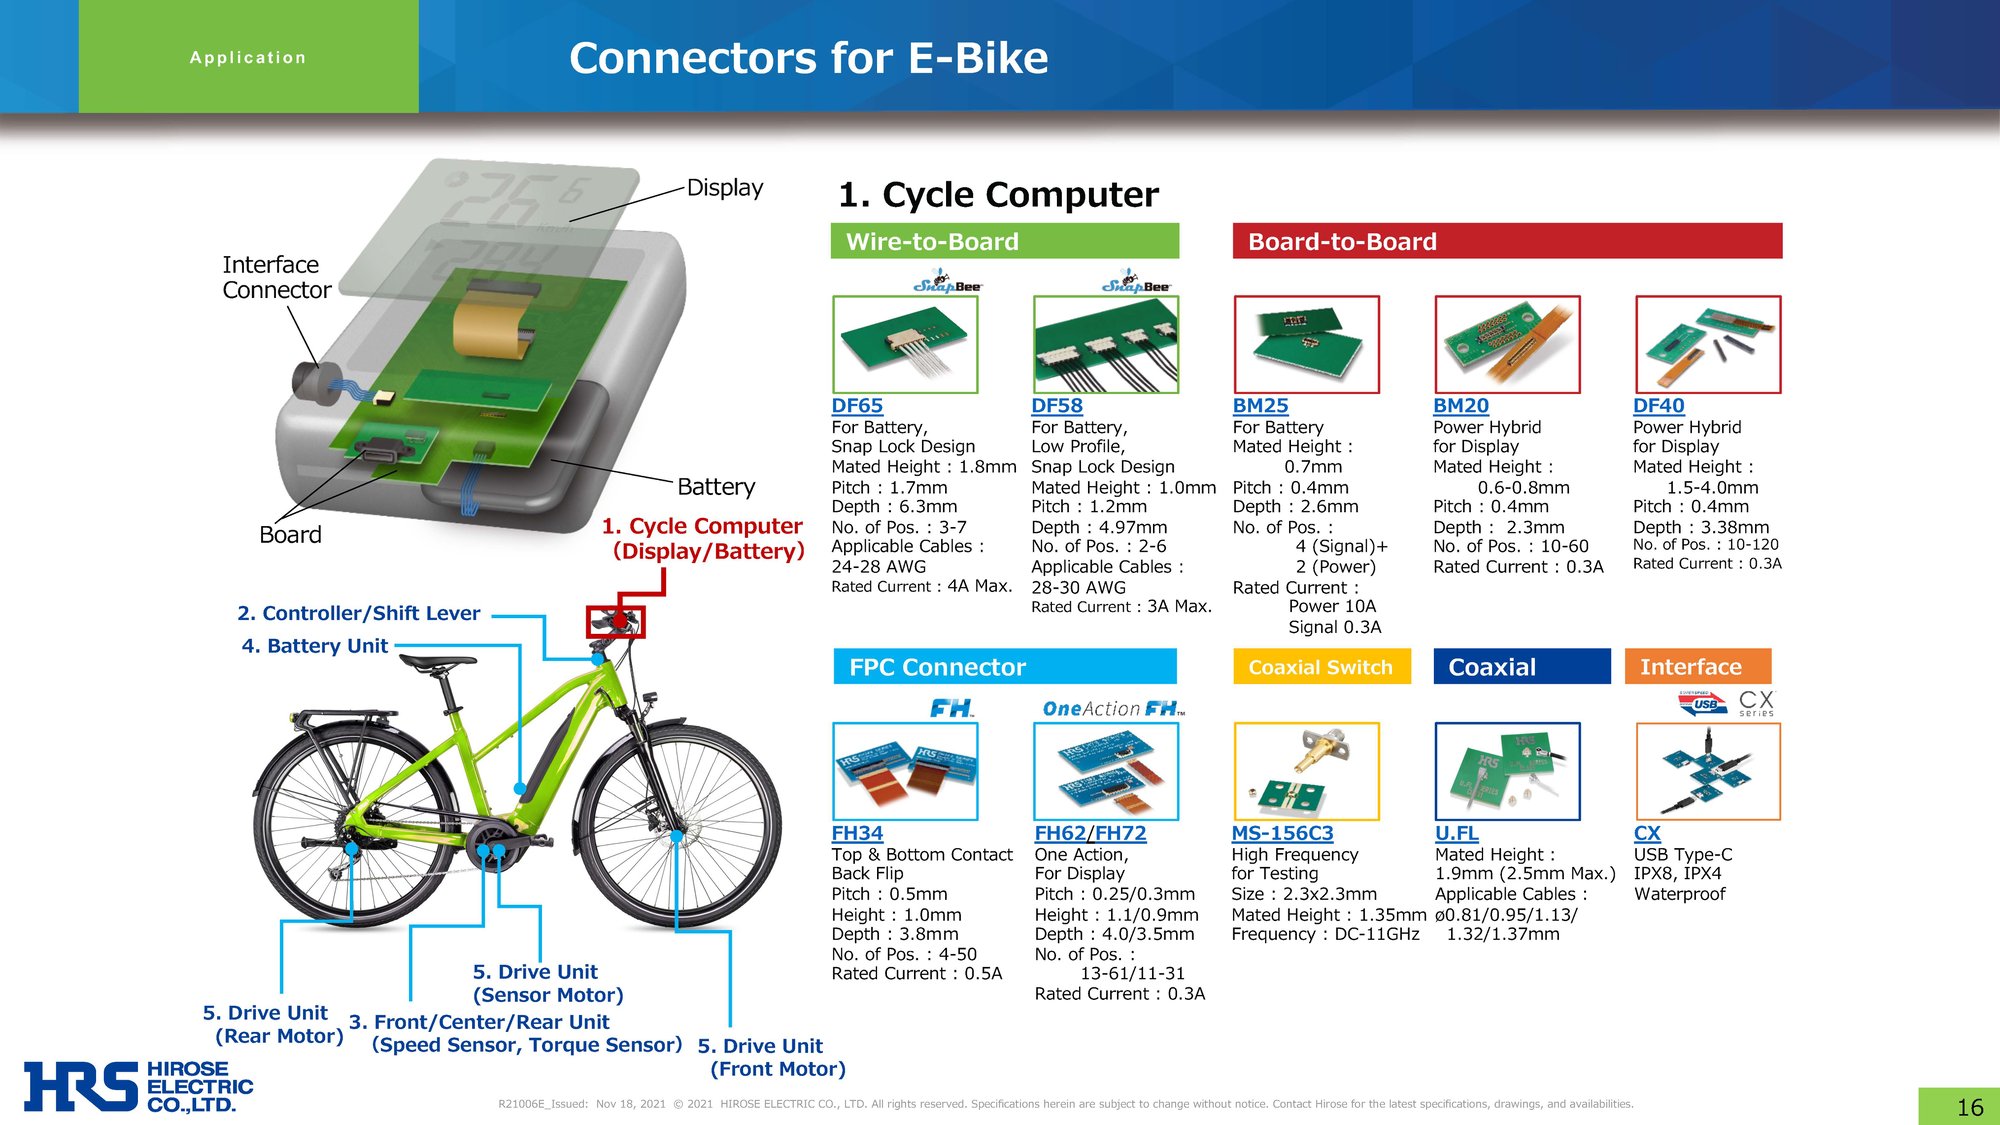 Blueprint illustrating connector placements for an e-bike cycle computer.